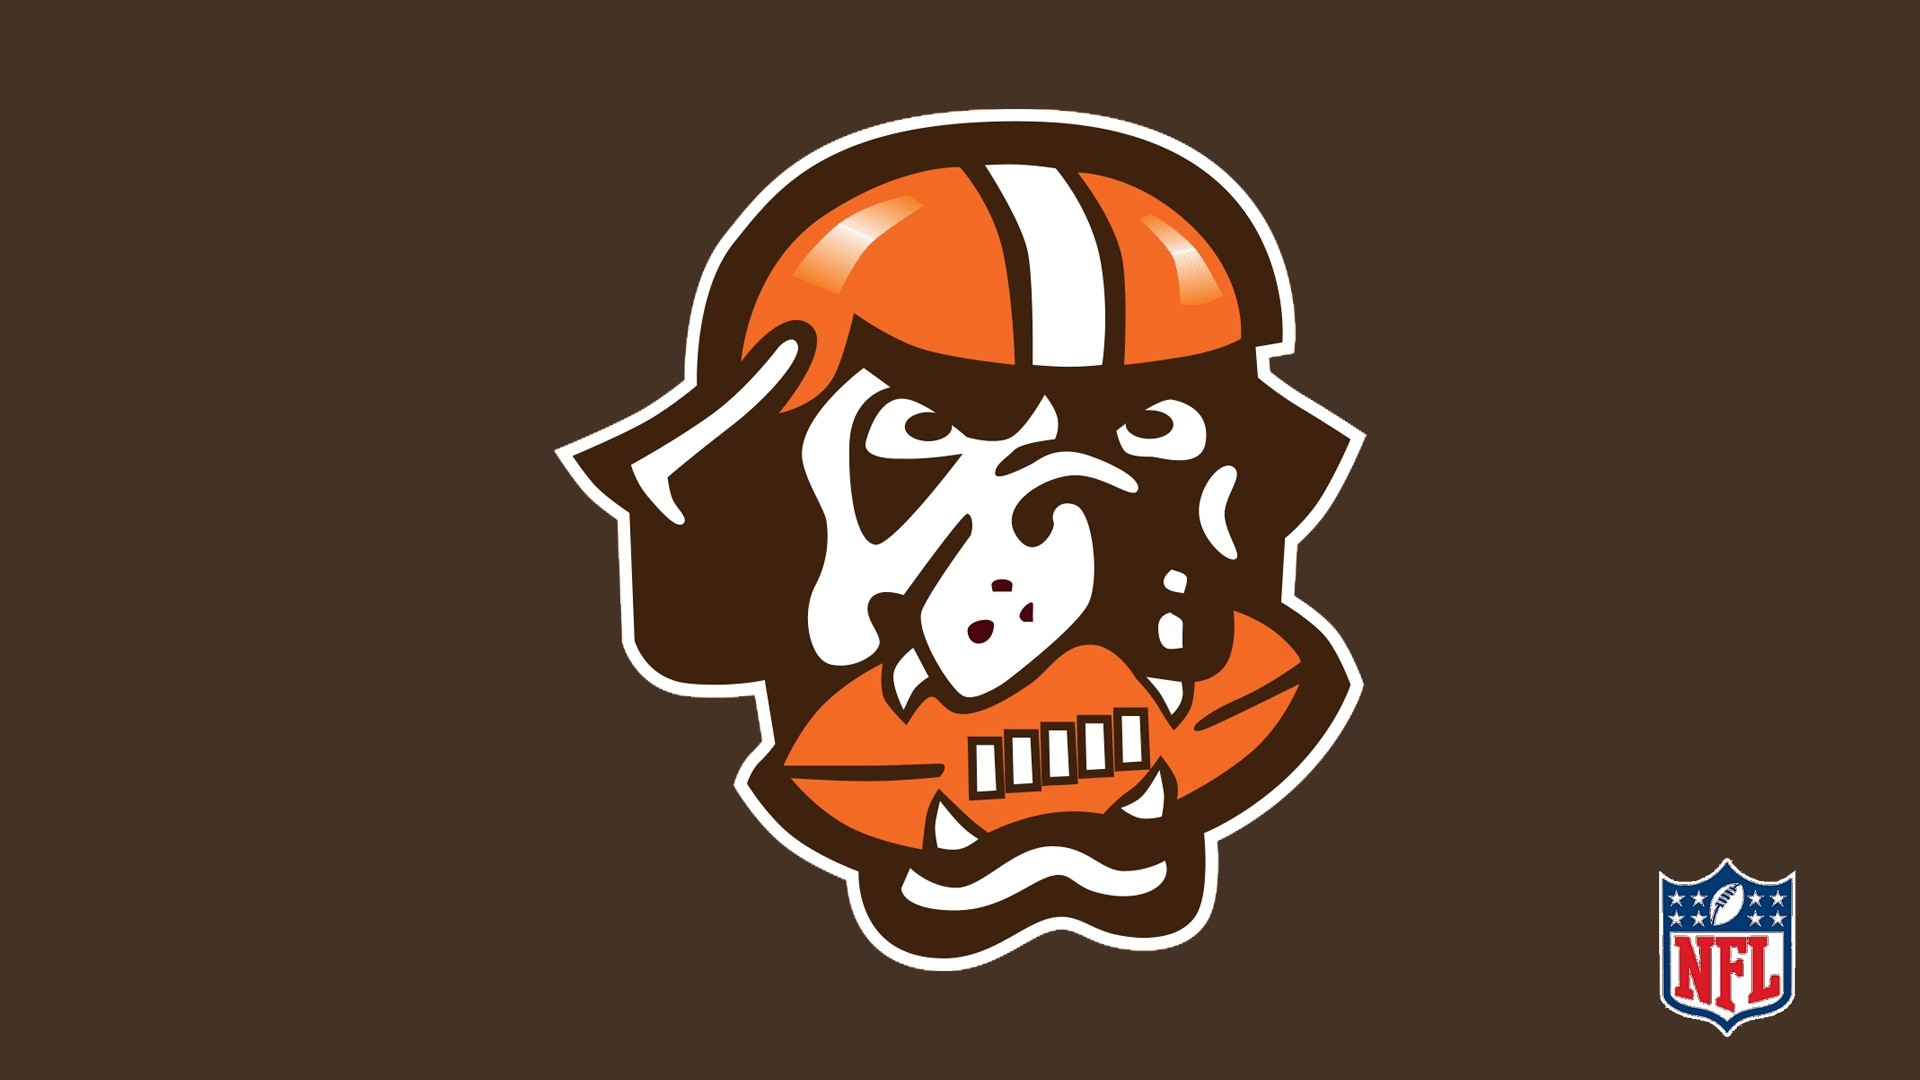 Cleveland Browns Wallpaper For Mac Backgrounds 1920x1080